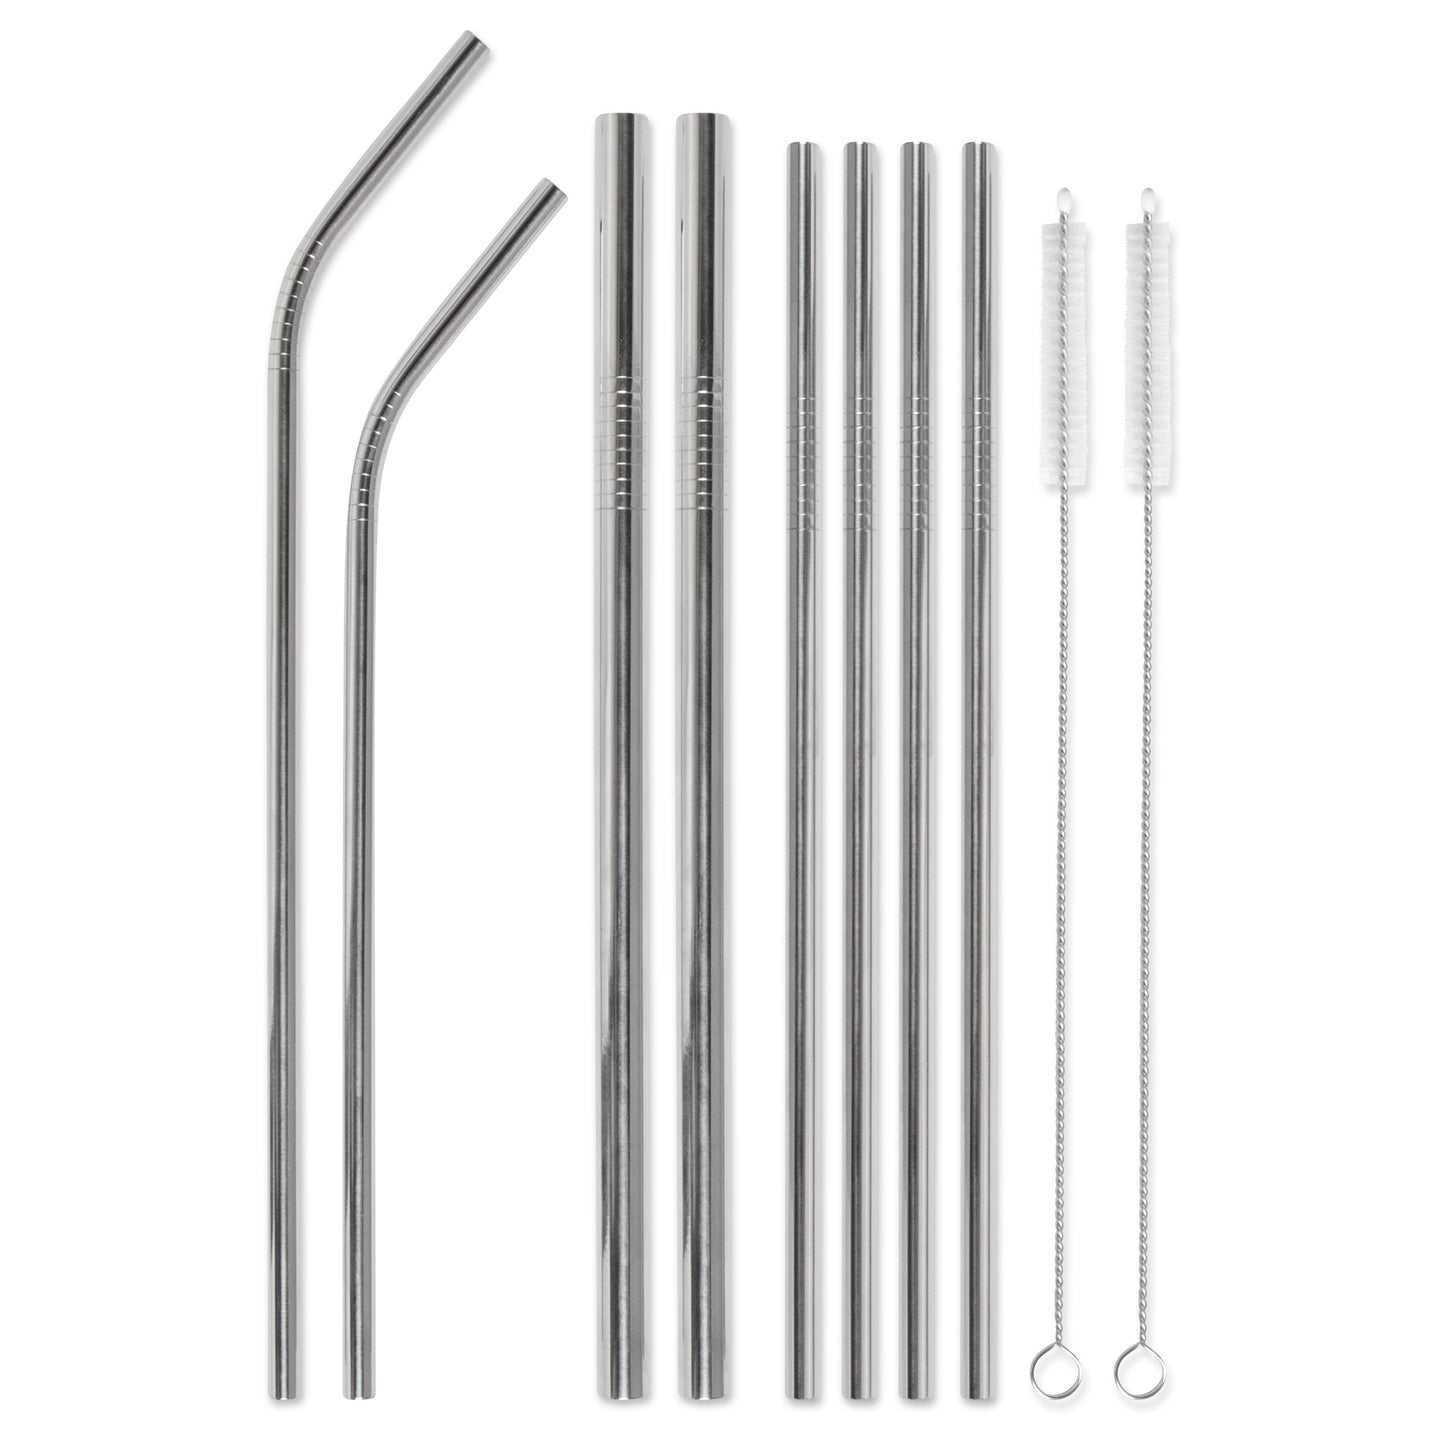 Stainless Steel Straw Set - "Clink & Drink"